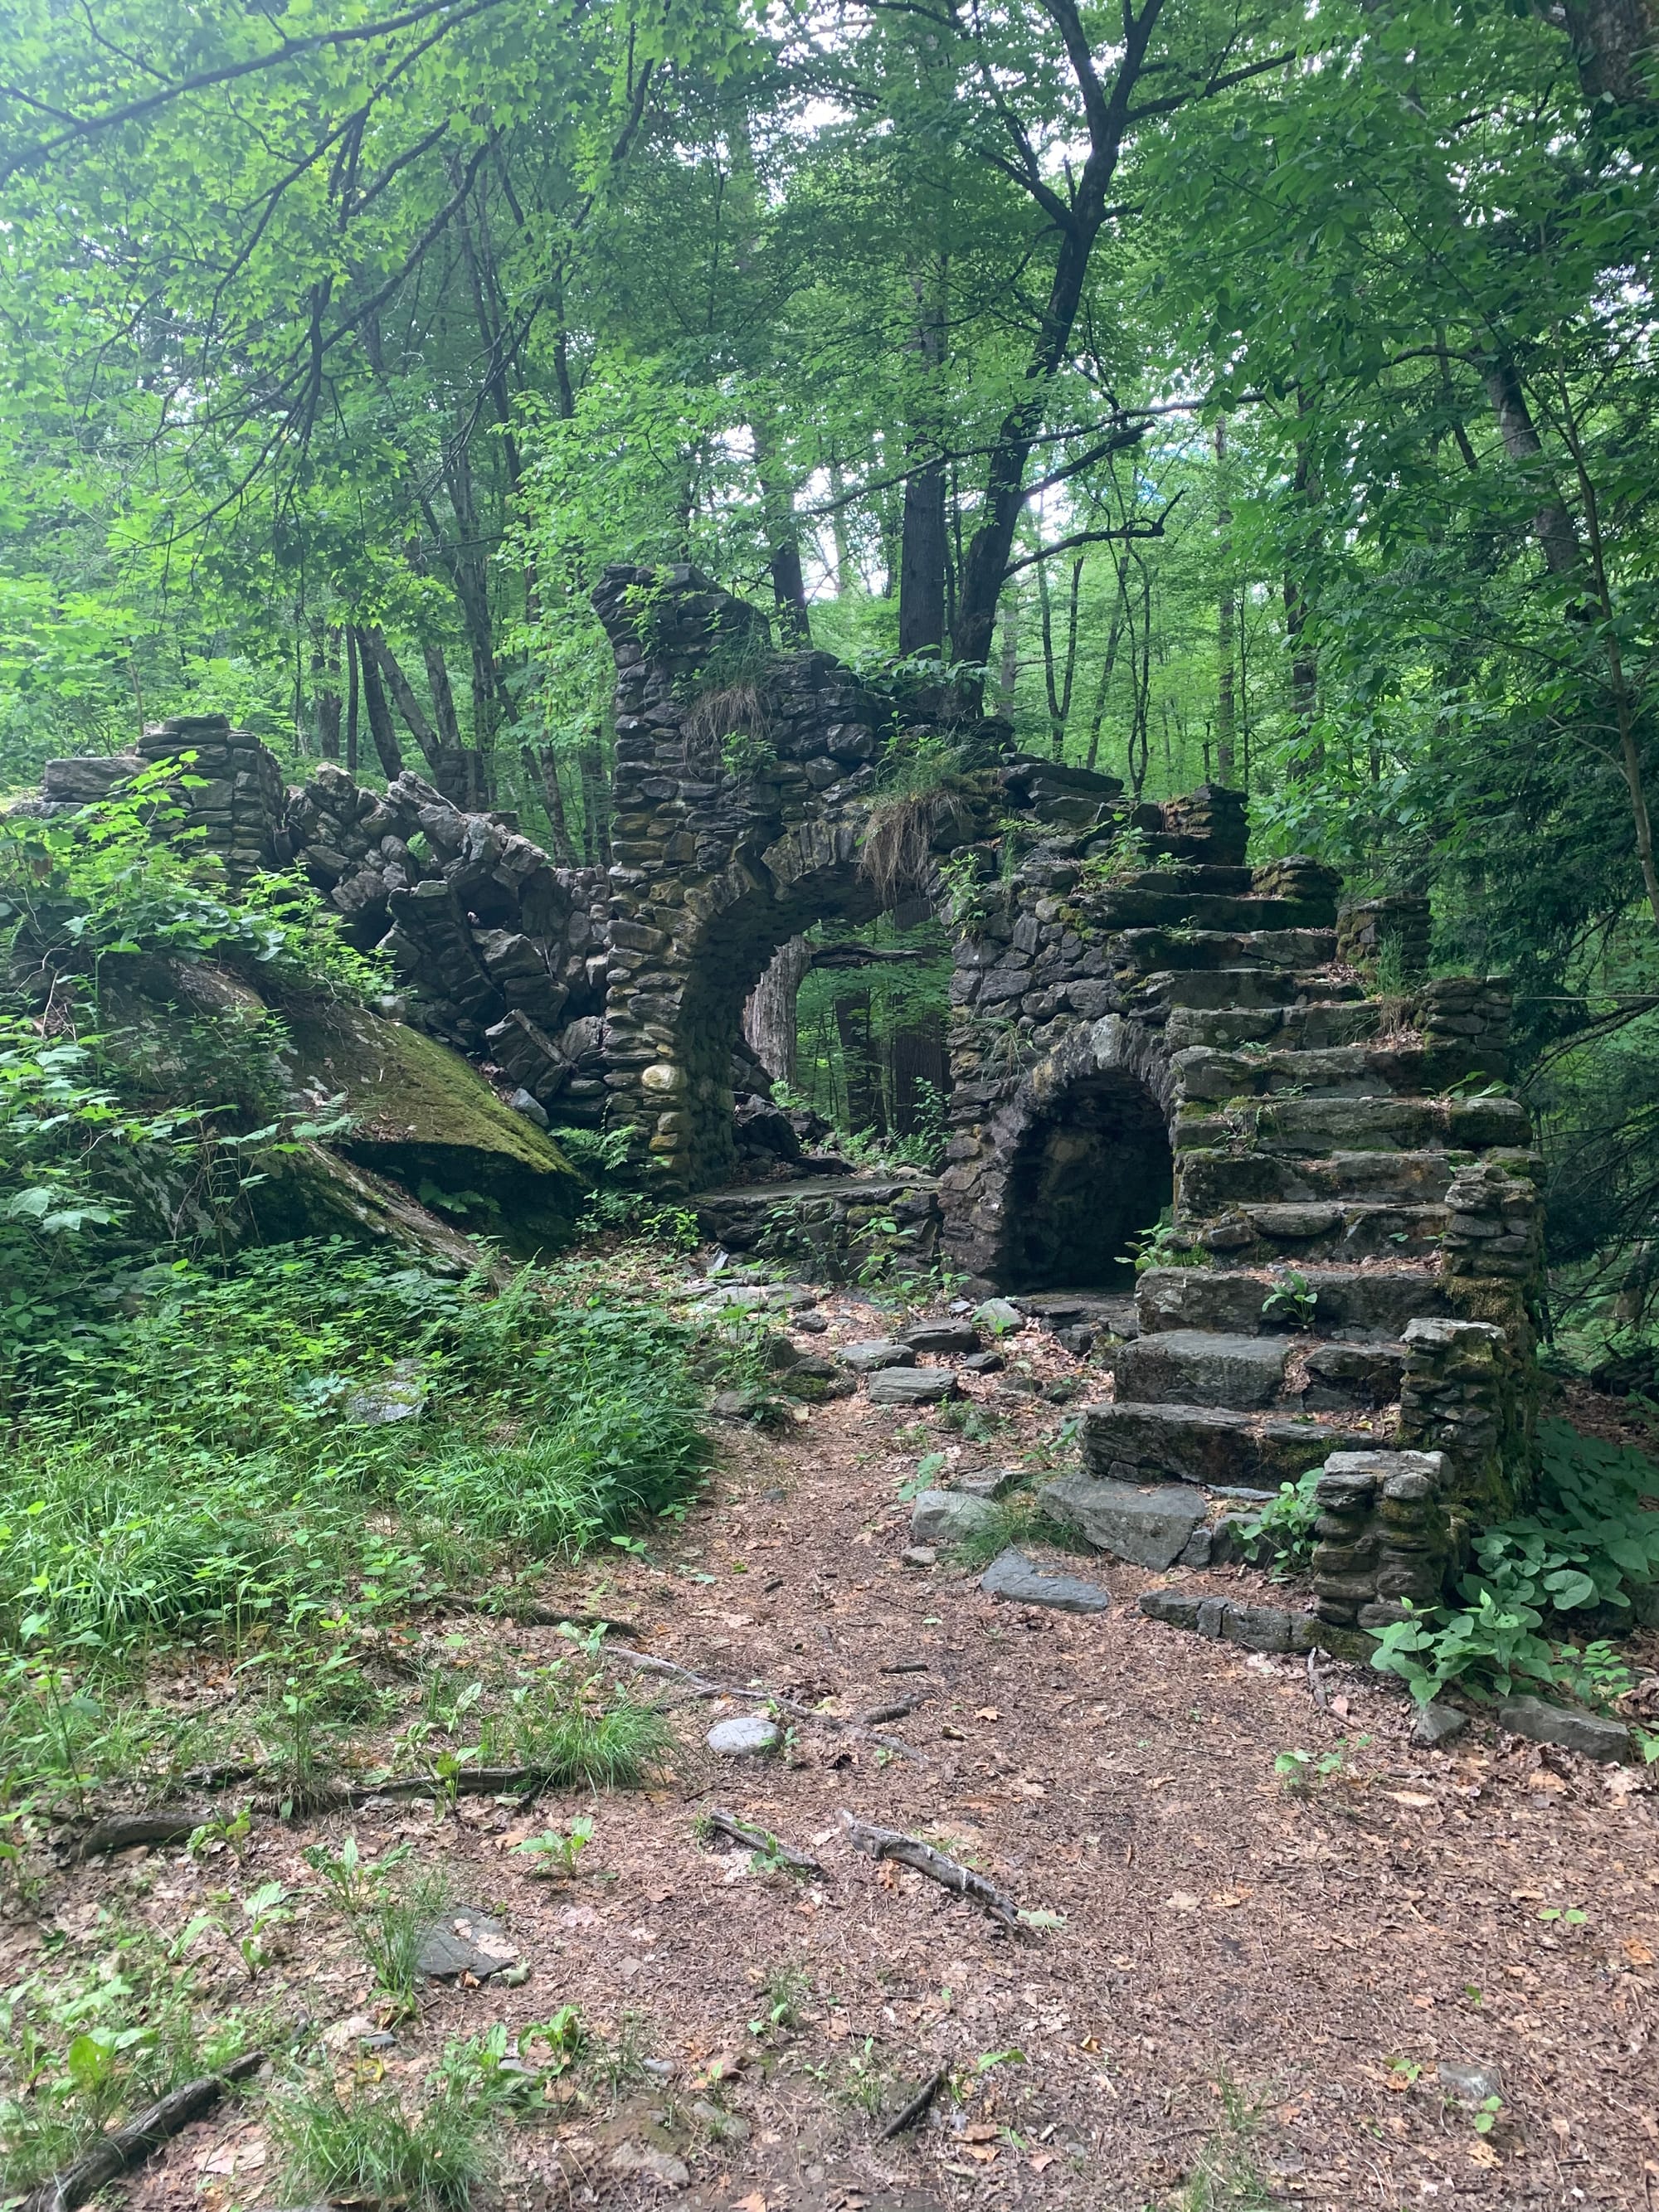 tumbling down rock walls & archway, stairs ascending to a fallen arch, surrounded by green trees